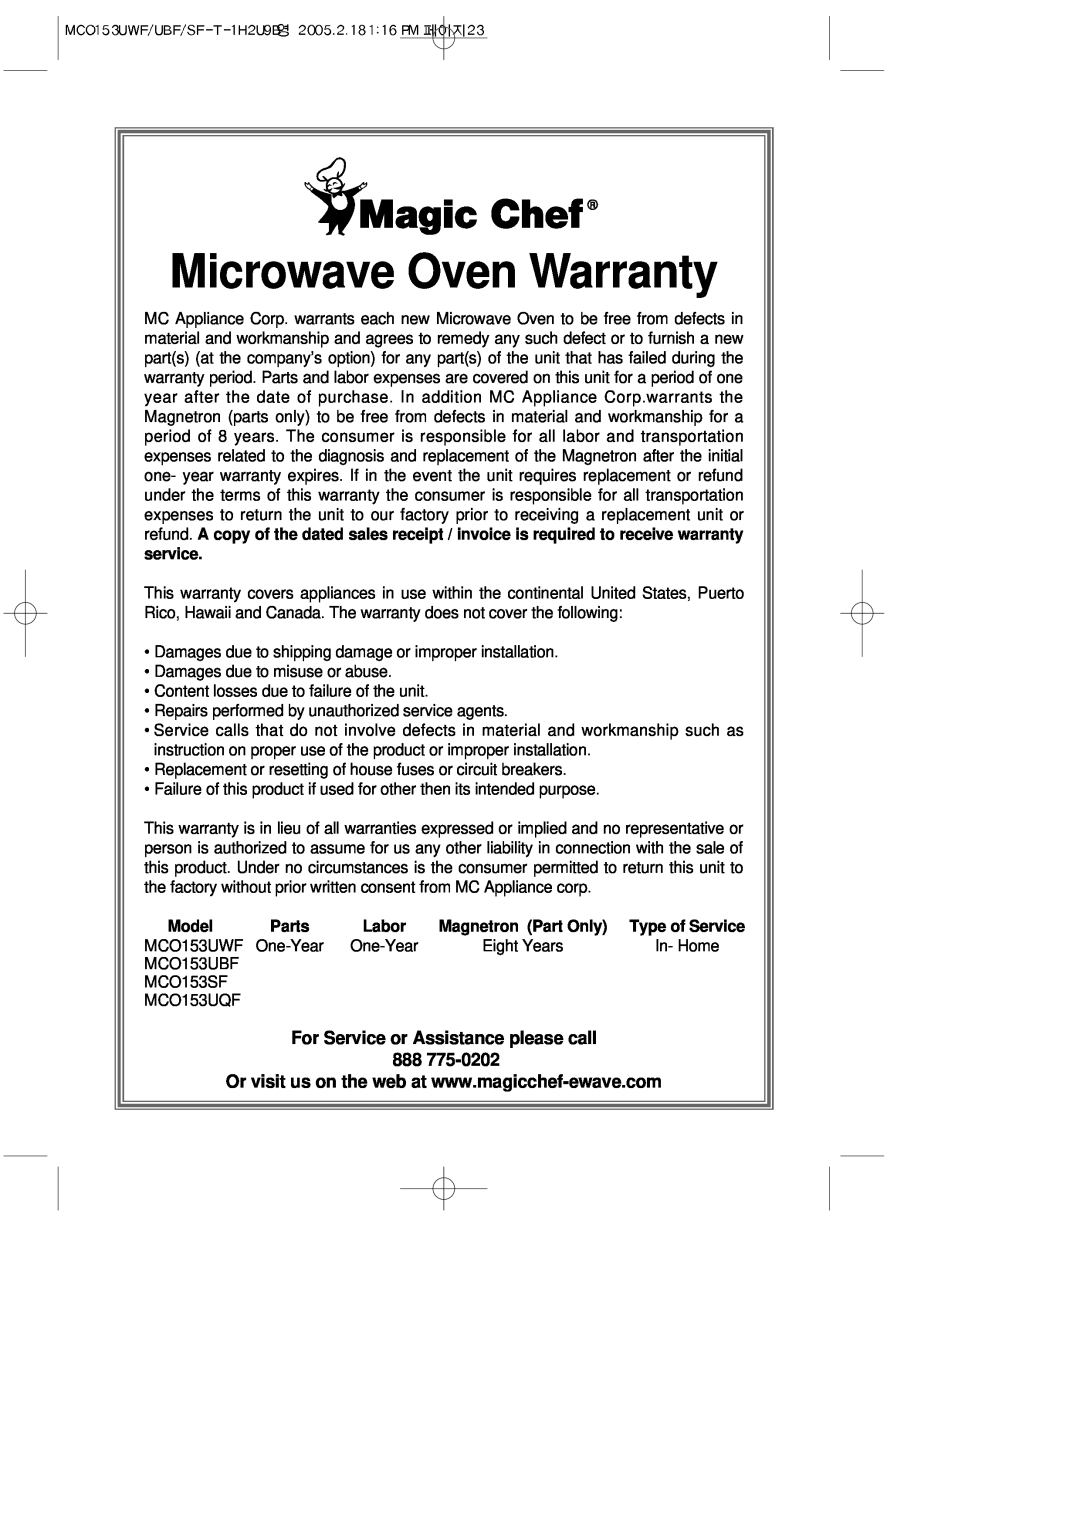 Magic Chef MCO153UWF, MCO153UQF Microwave Oven Warranty, For Service or Assistance please call, Model, Magnetron Part Only 